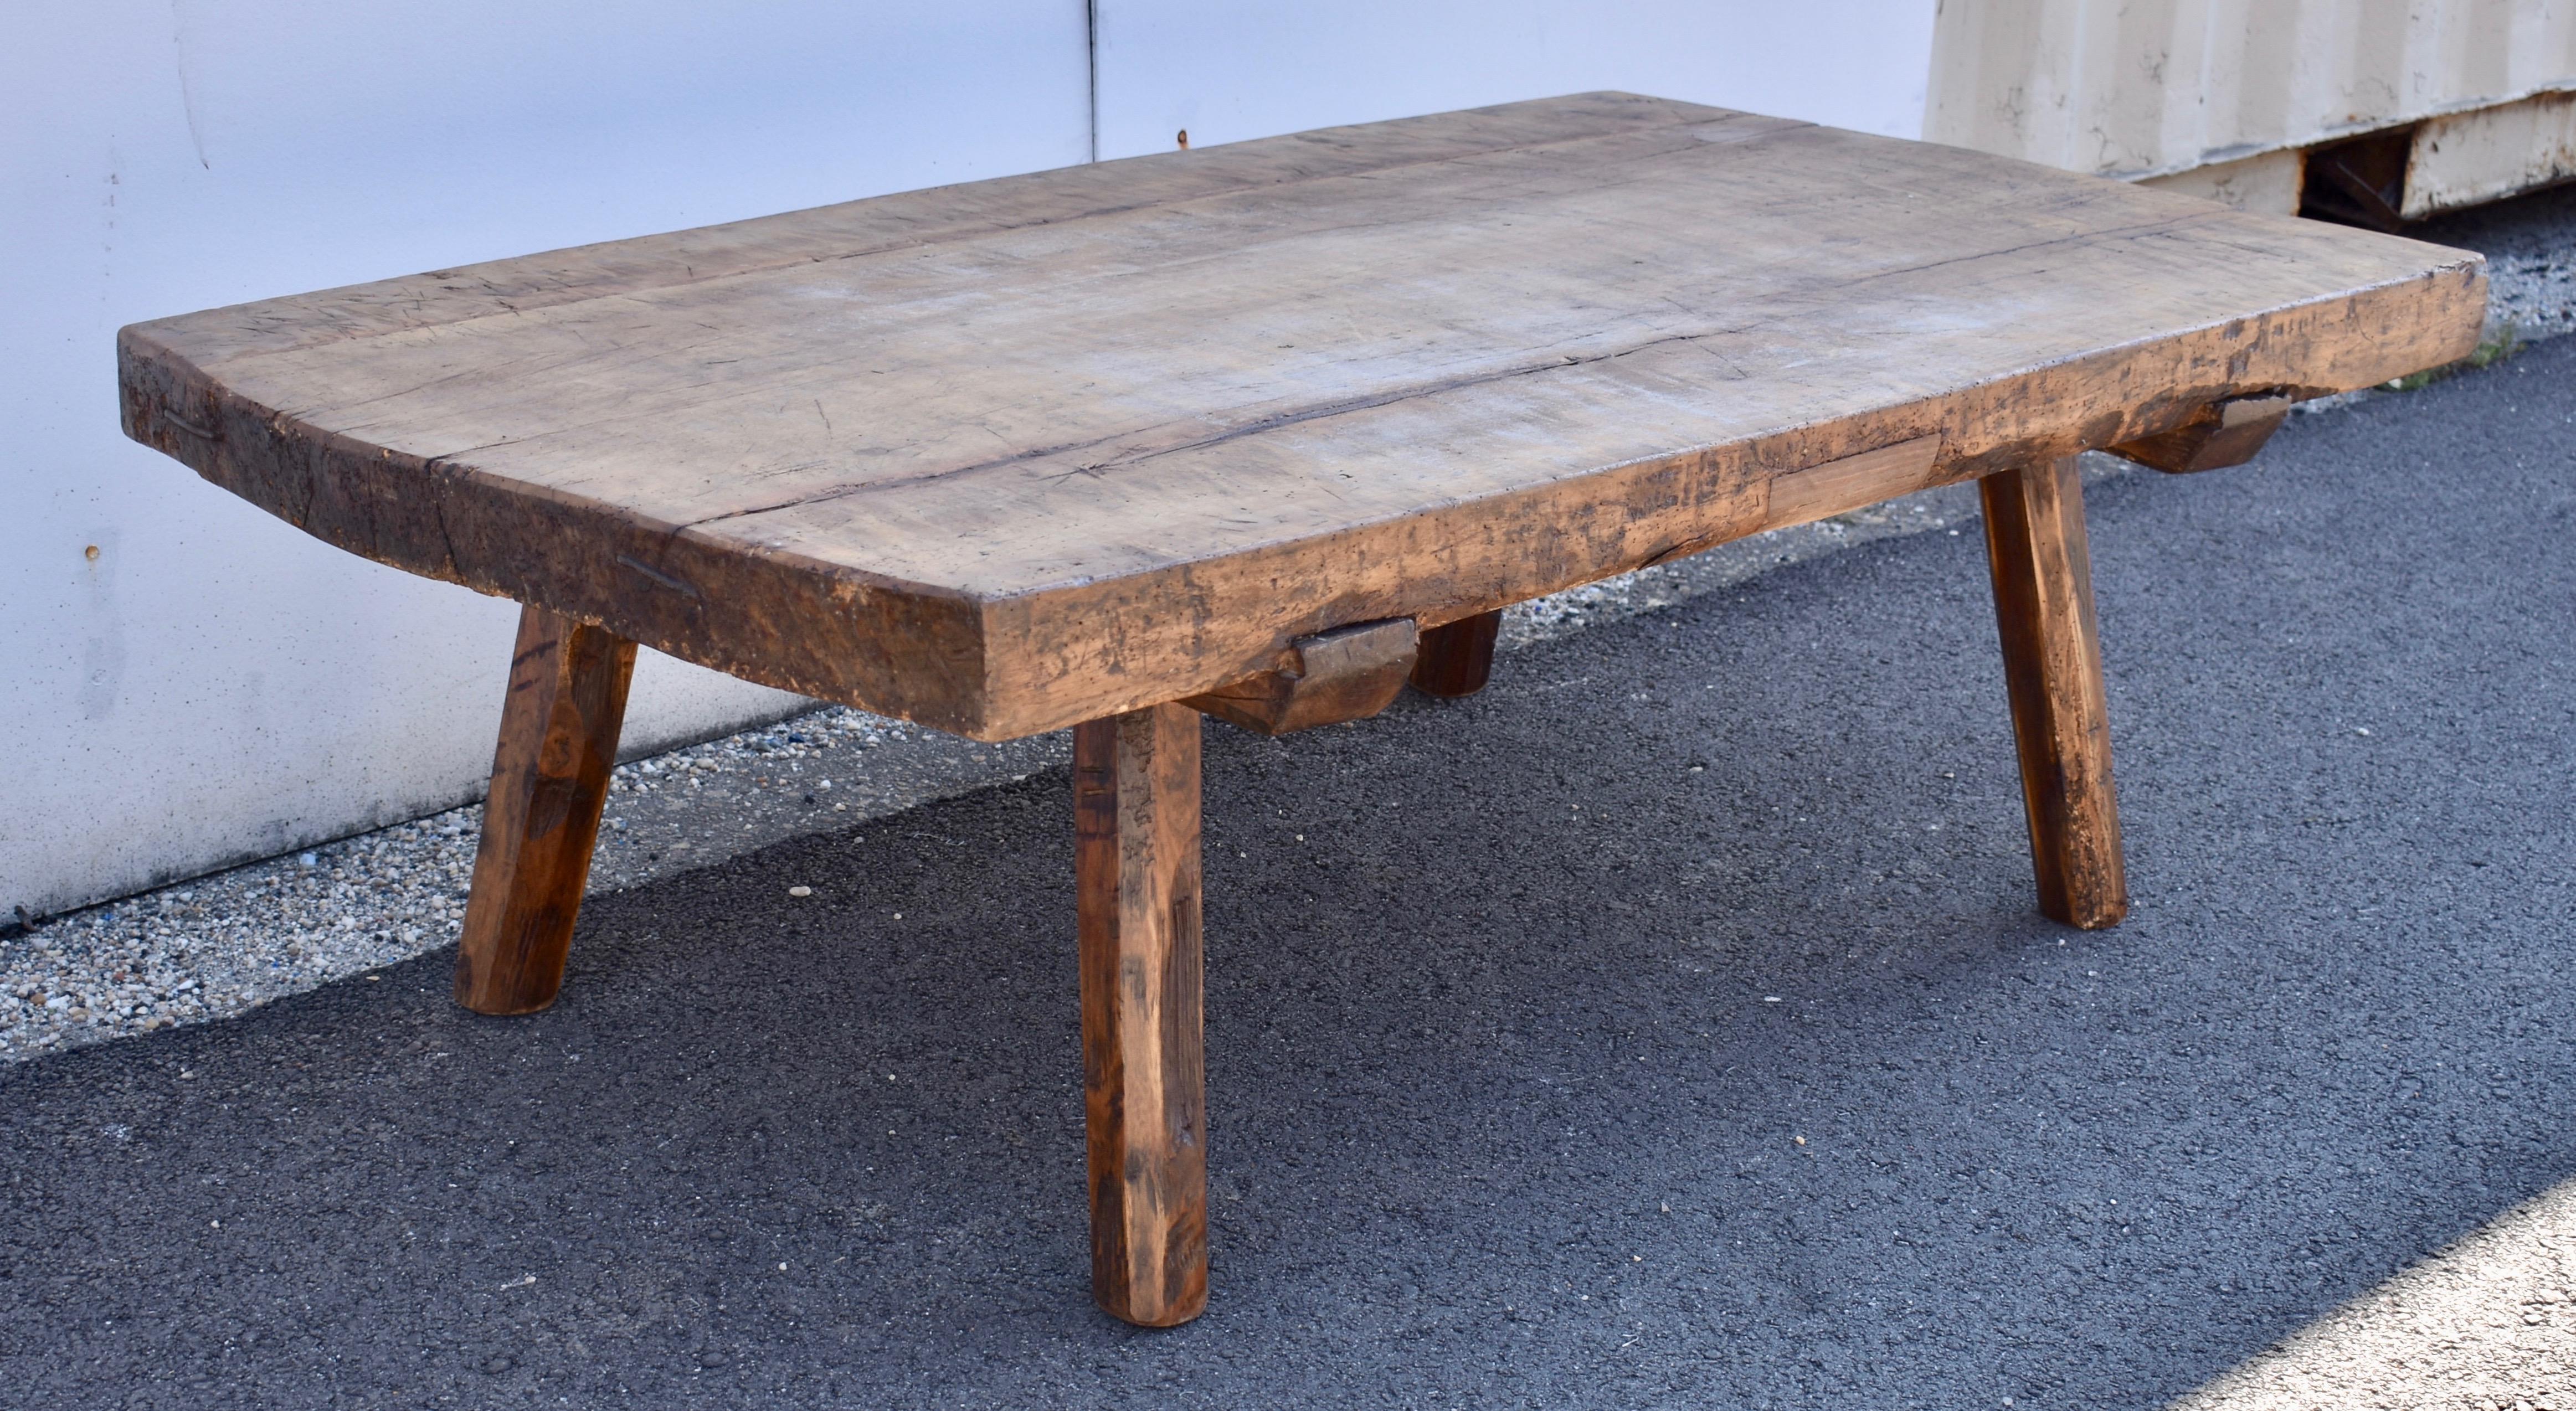 What a fabulously rustic table!  Three planks of oak nearly three inches thick are joined to make this beautiful slab, slightly rounded at one end and bearing all the scrapes and scars of decades of purposeful use.  A modern patch on one bottom edge